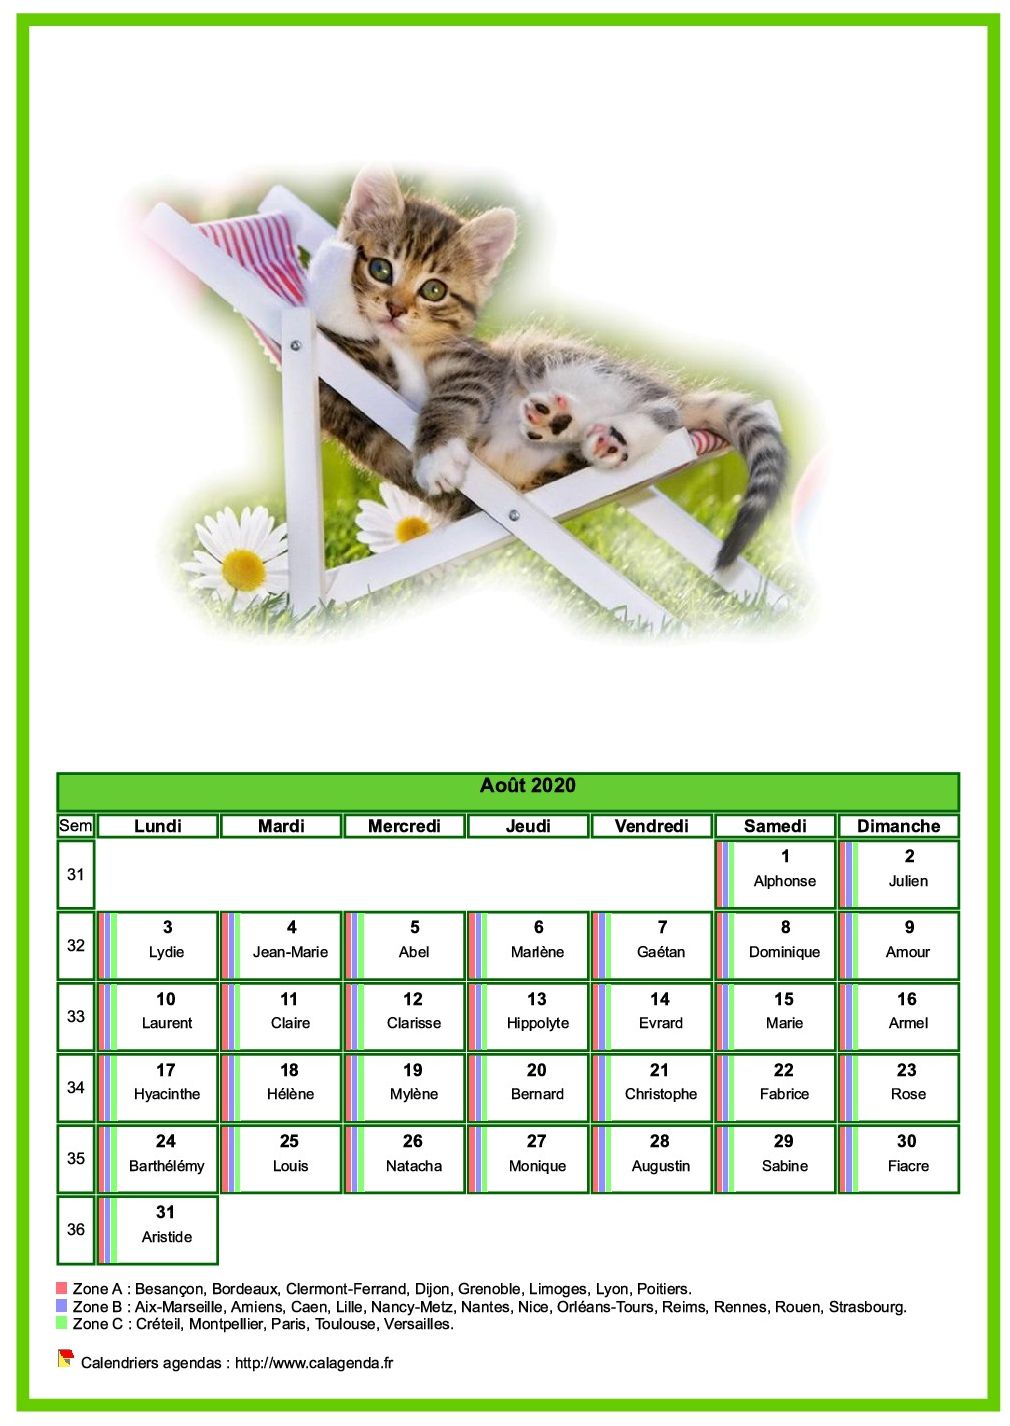 Calendrier Aout Chats